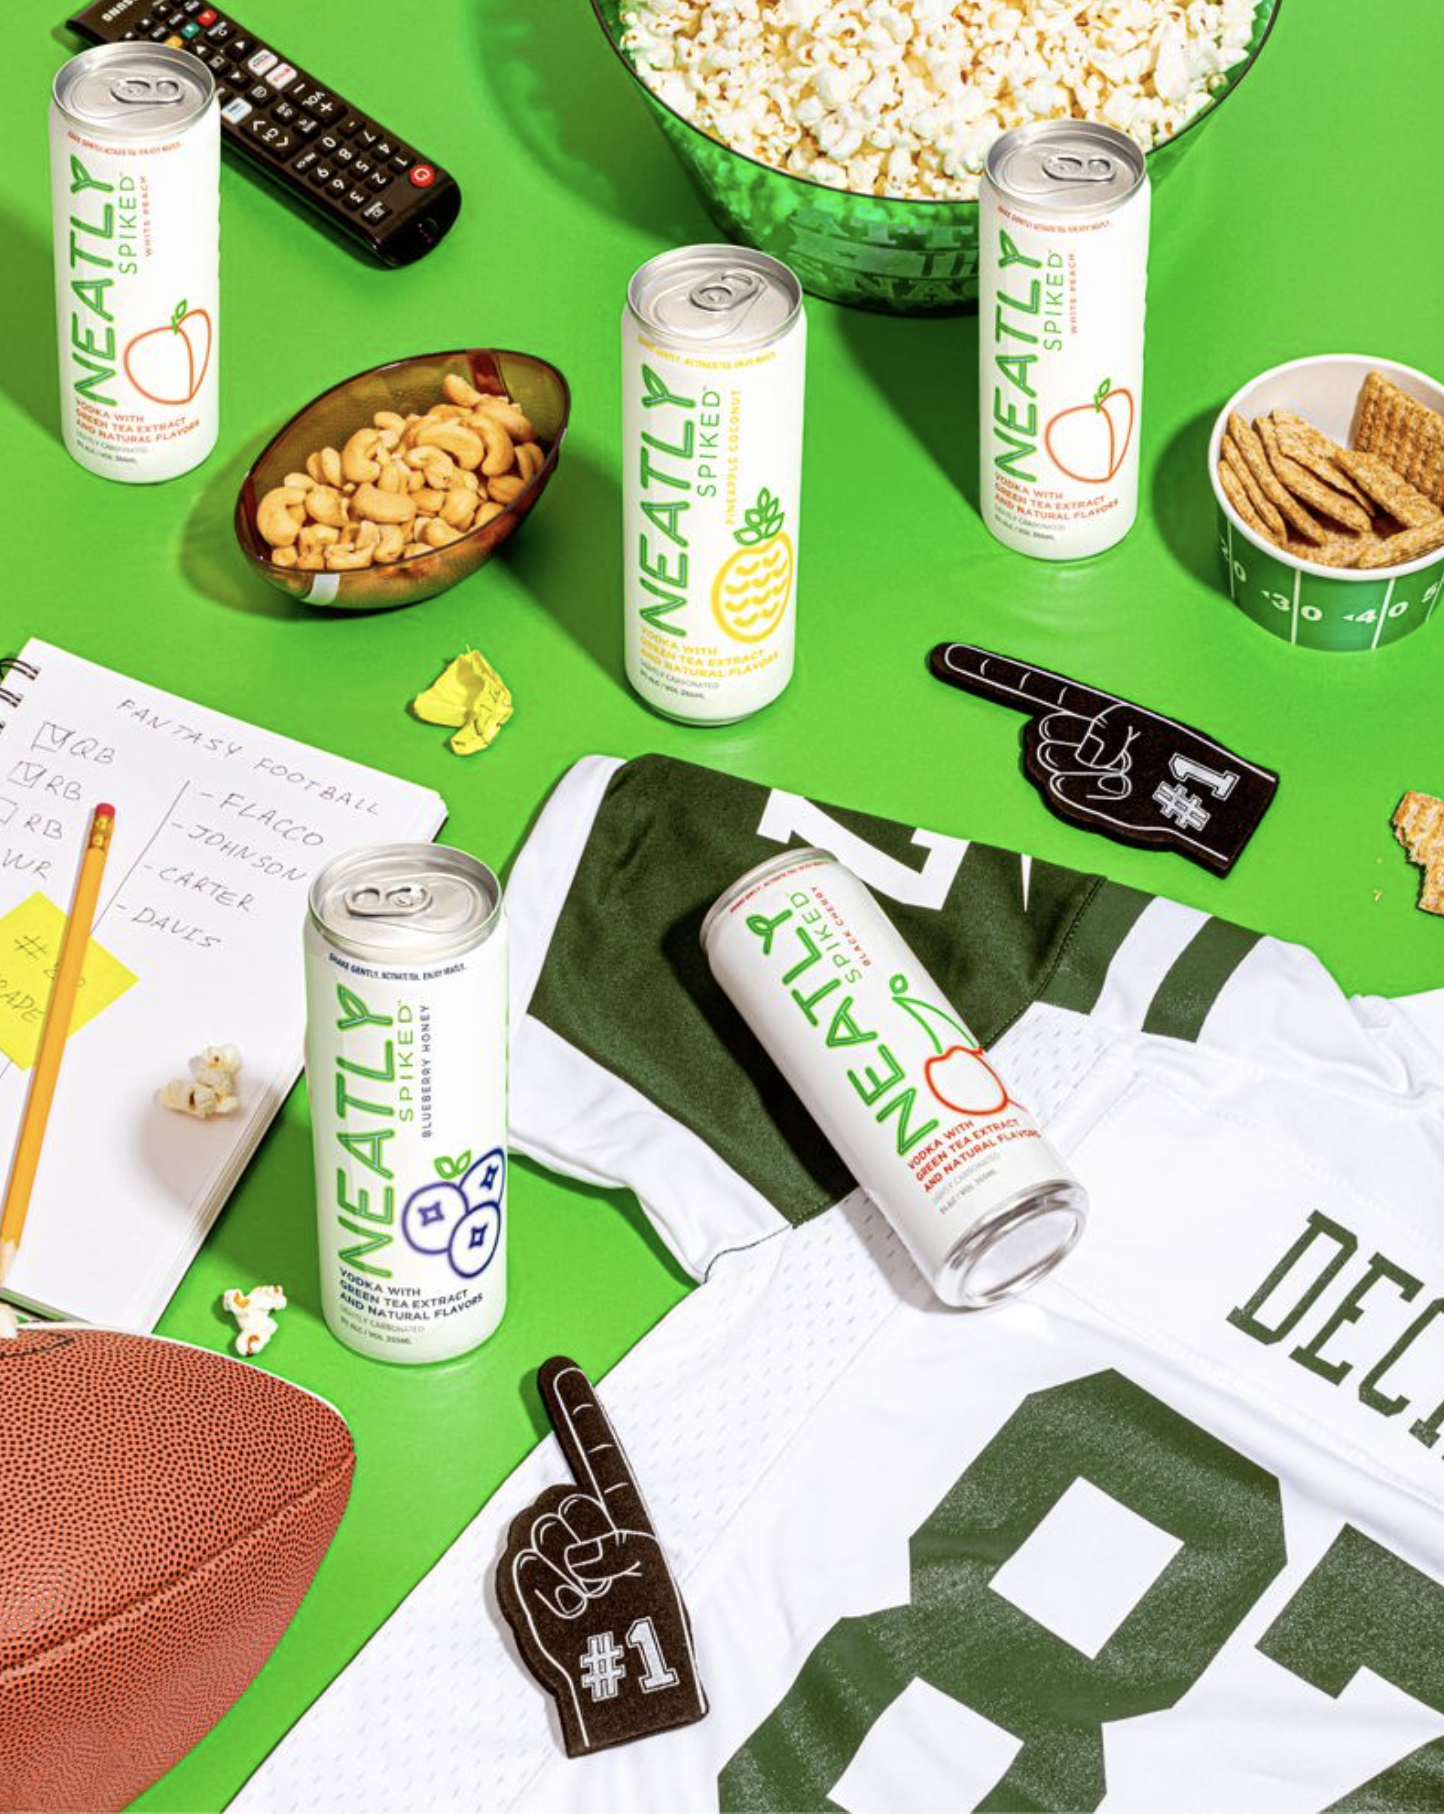 Cans of Neatly Spiked hard seltzers surrounded by football gear.